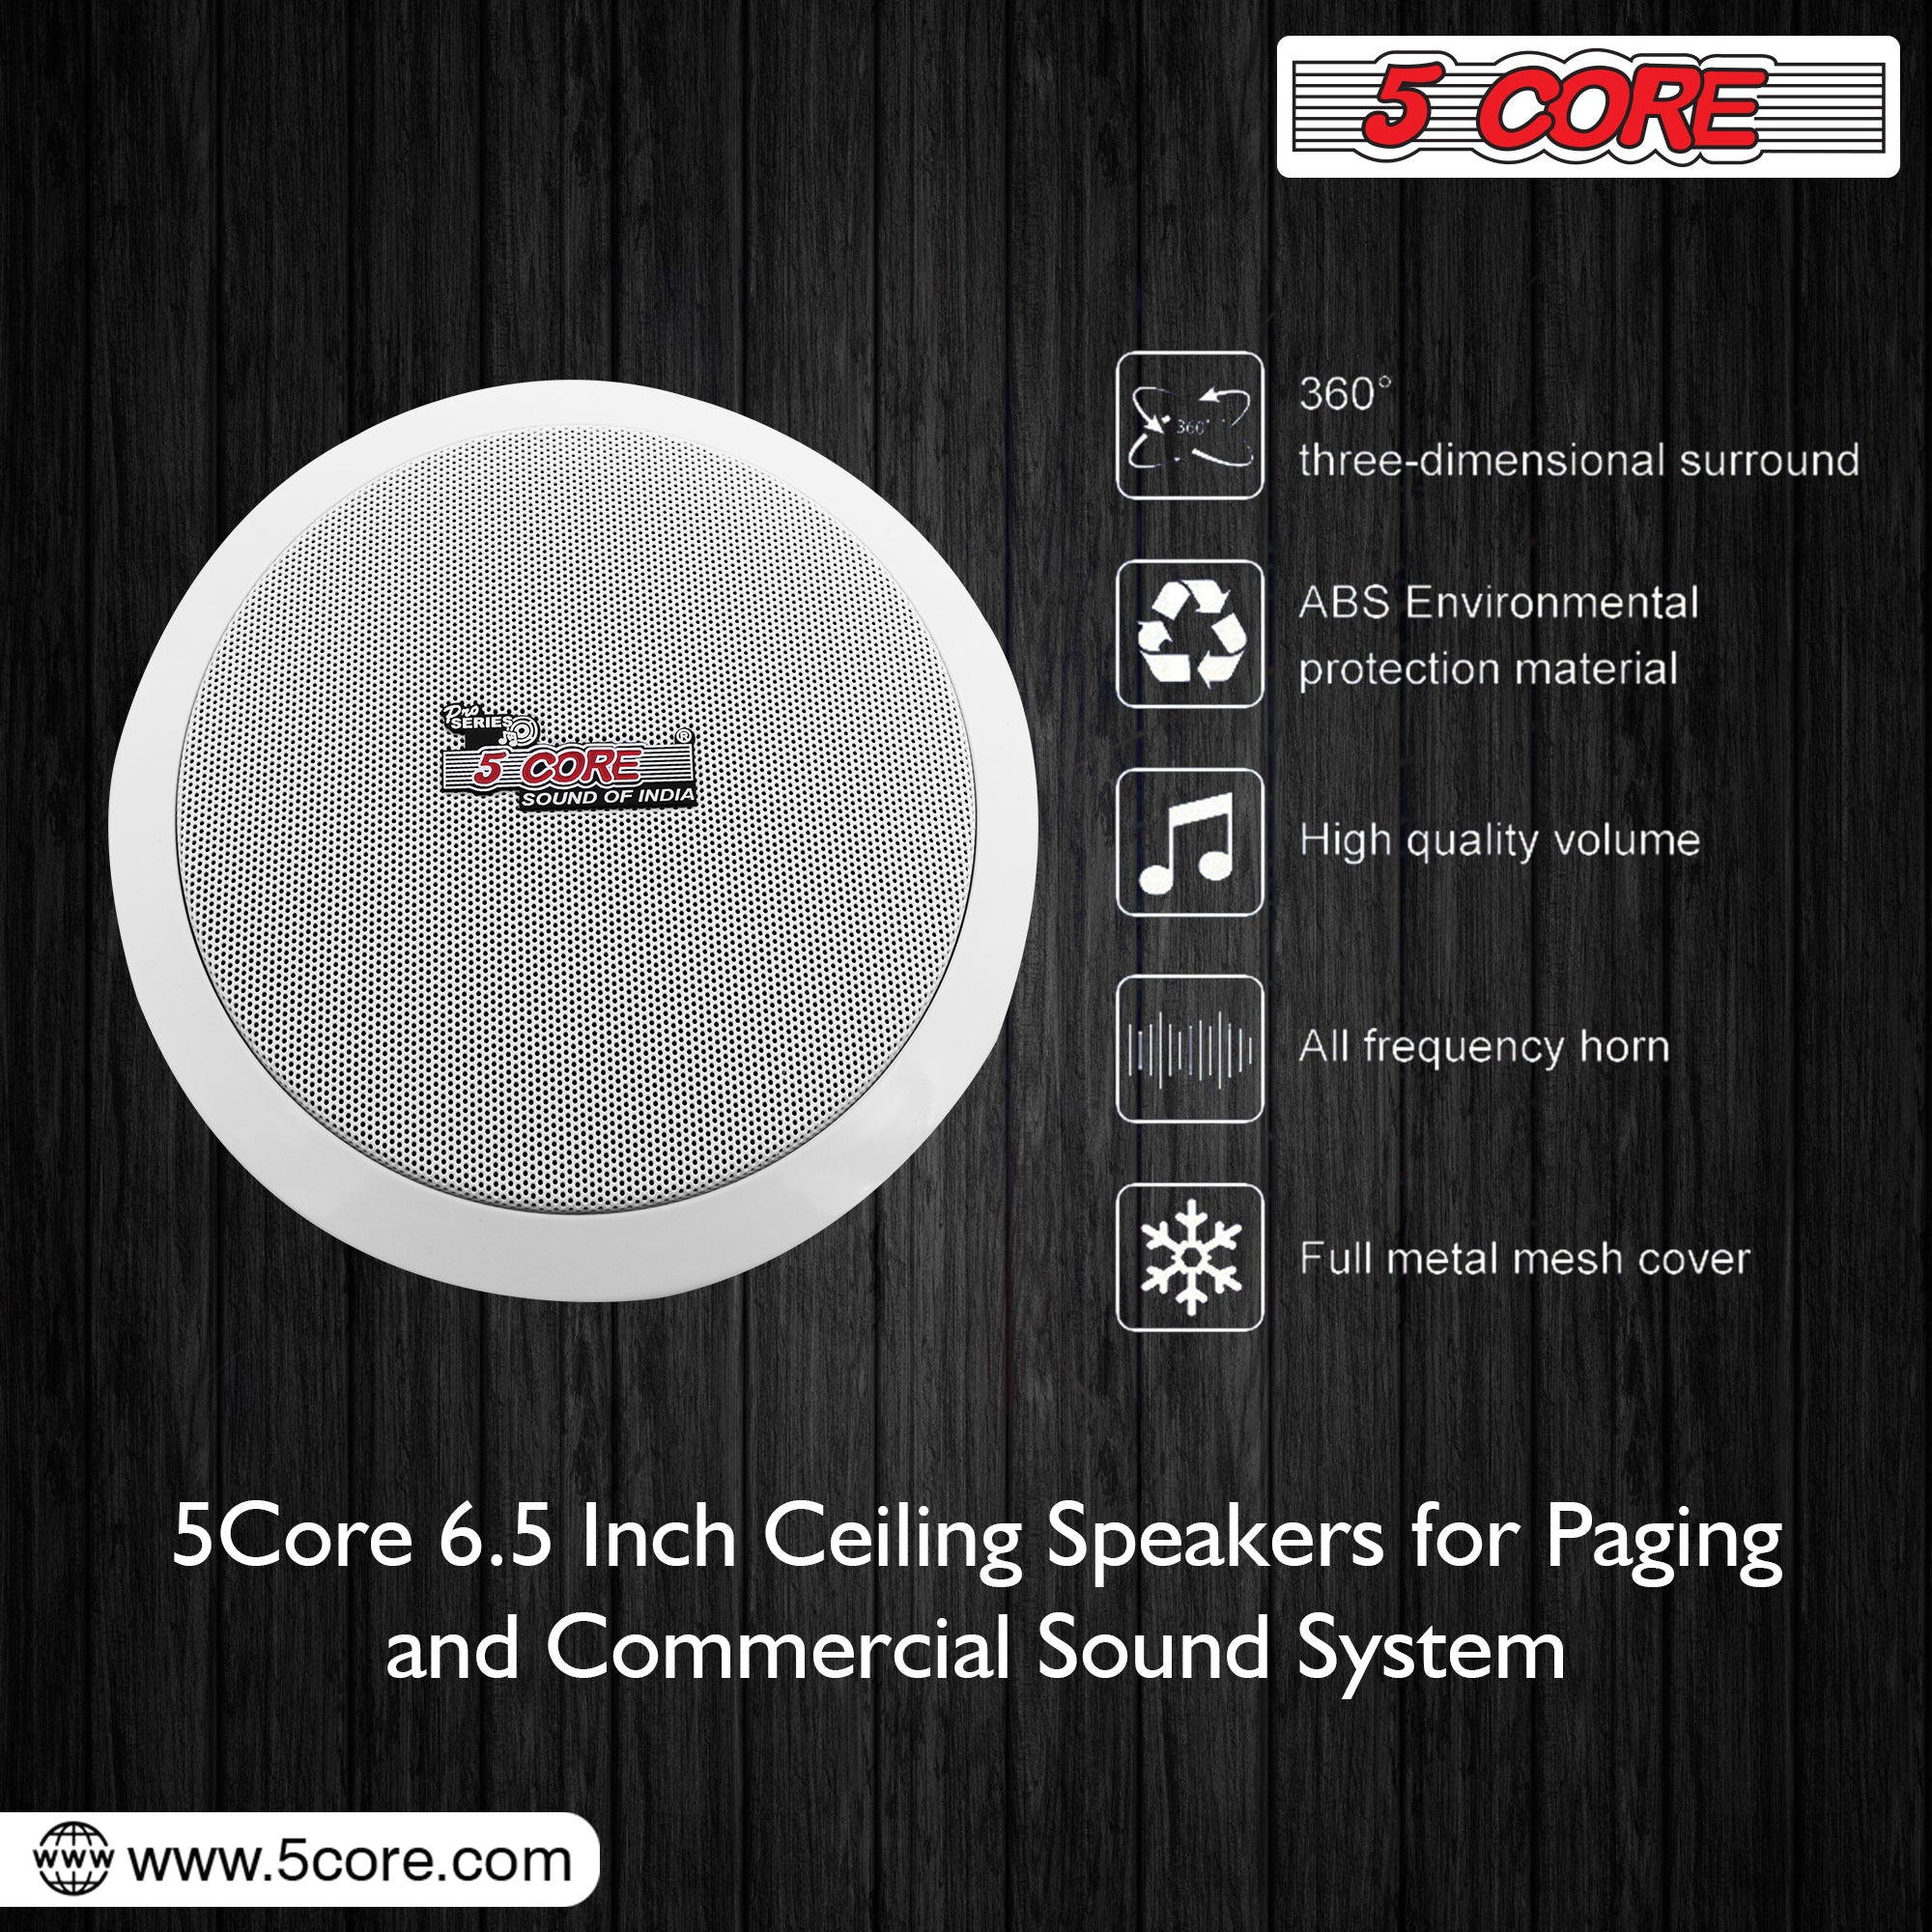 6.5 inch ceiling speakers for paging and commercial sound system